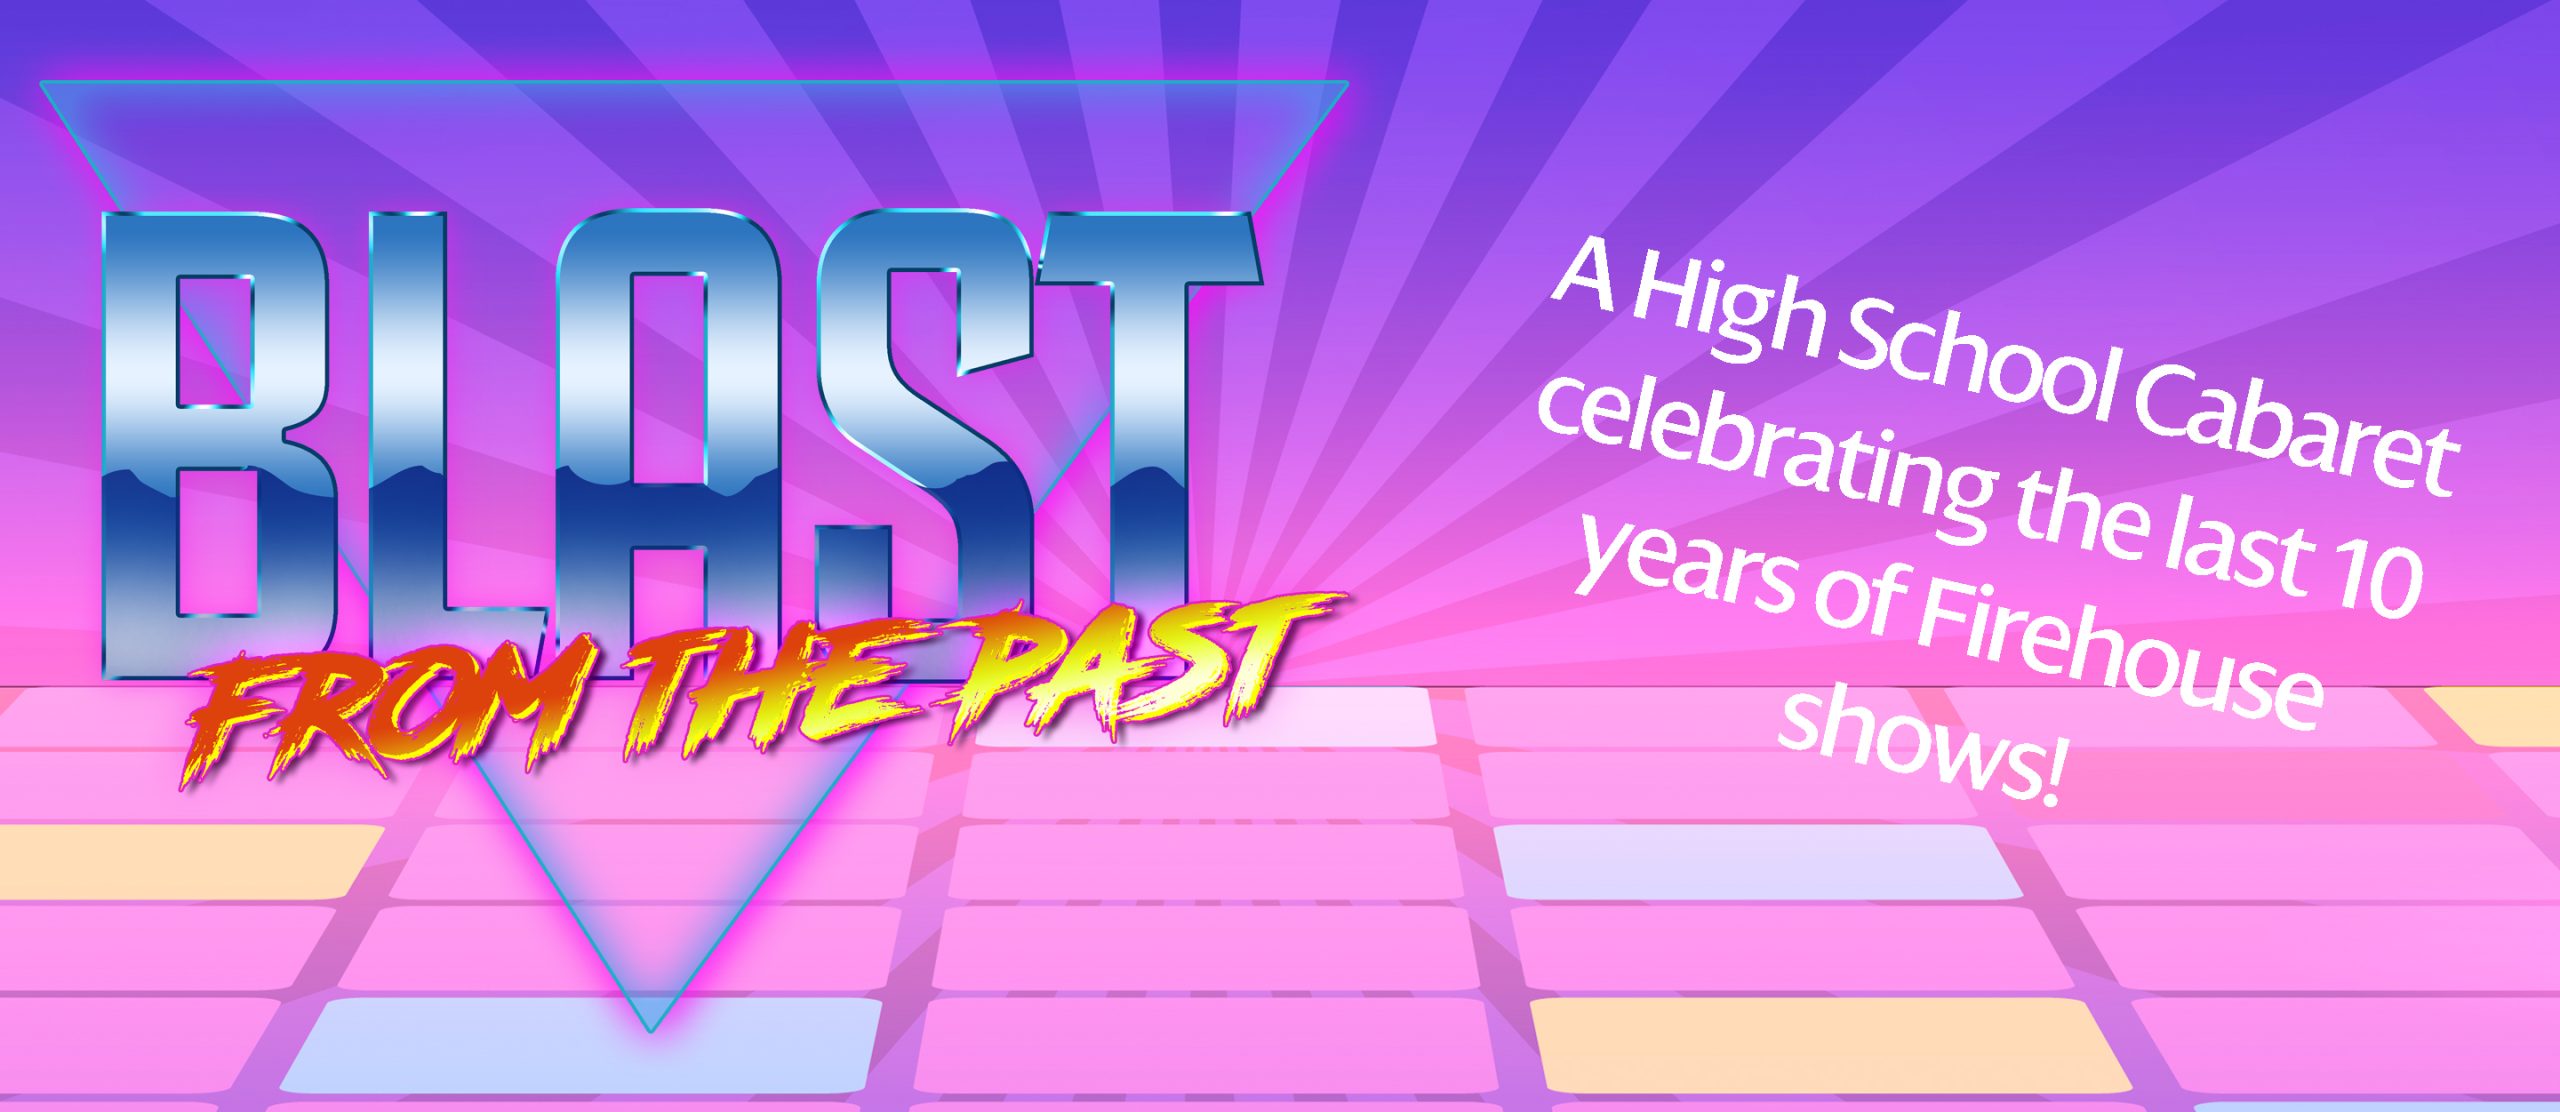 Blast from the Past | A High School Cabaret